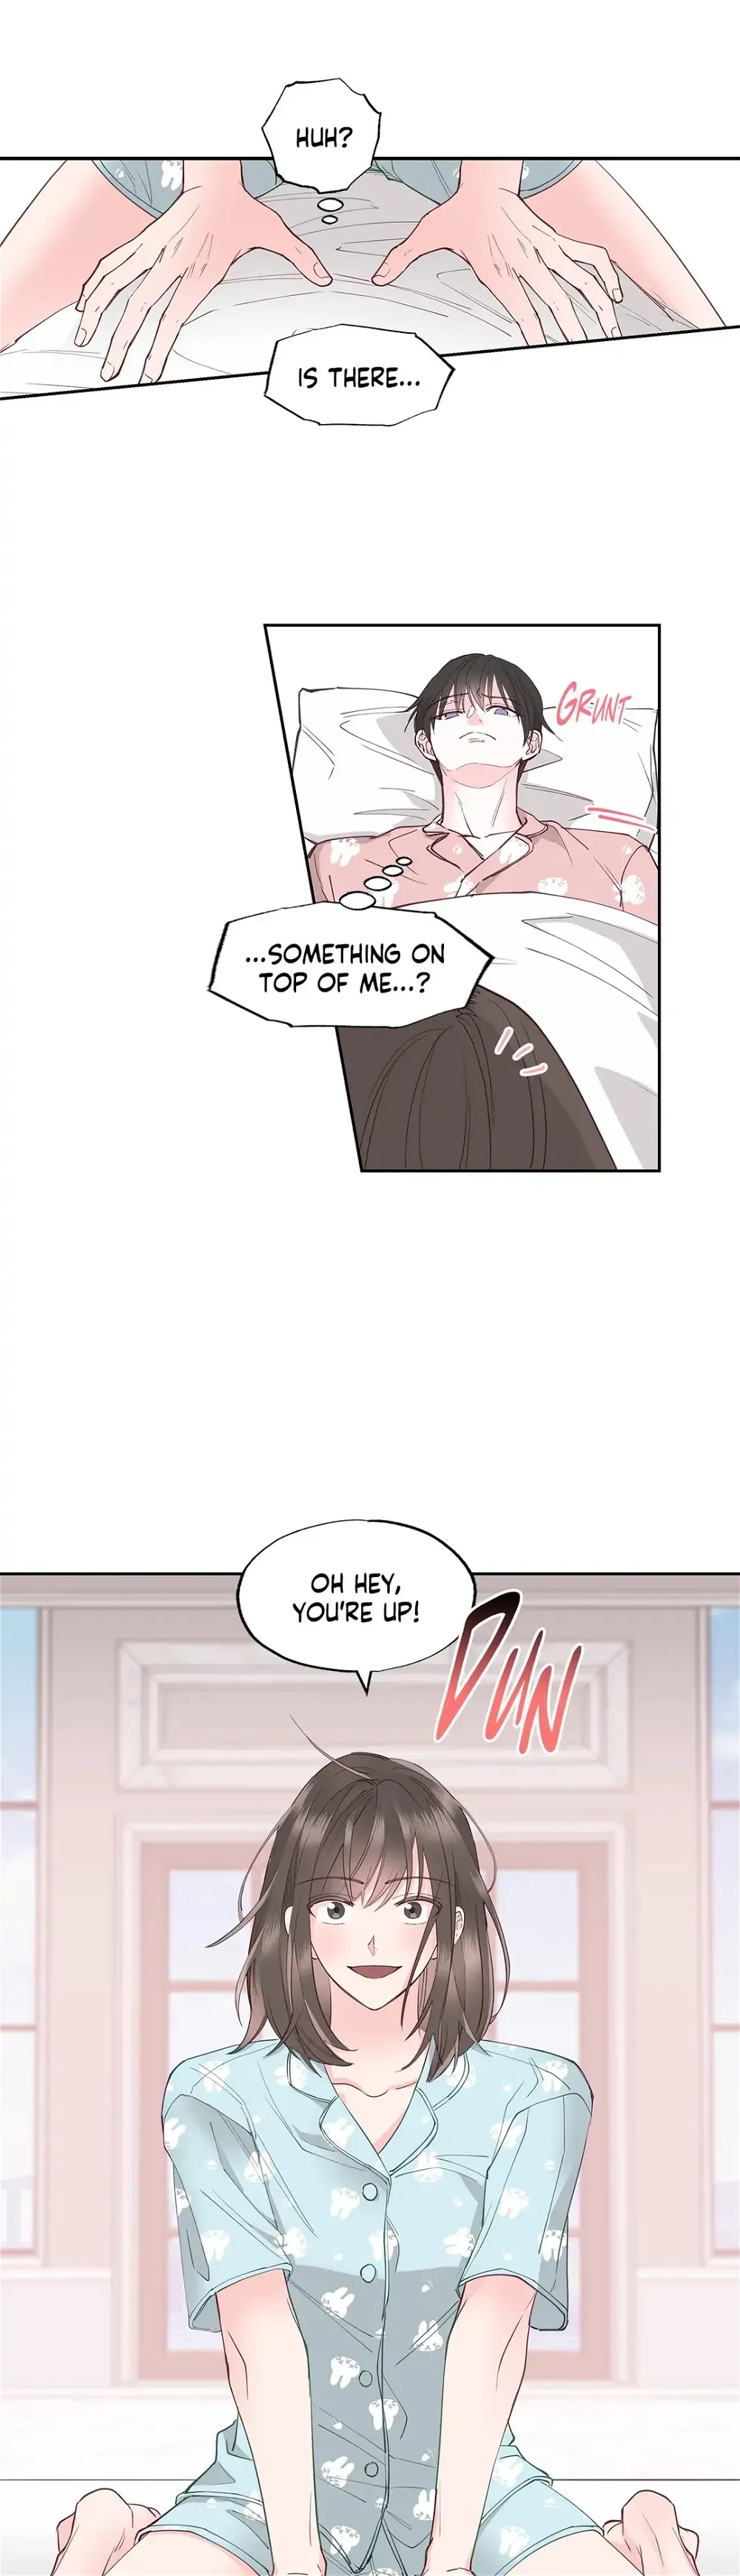 Learning to Love You chapter 20 - Page 22